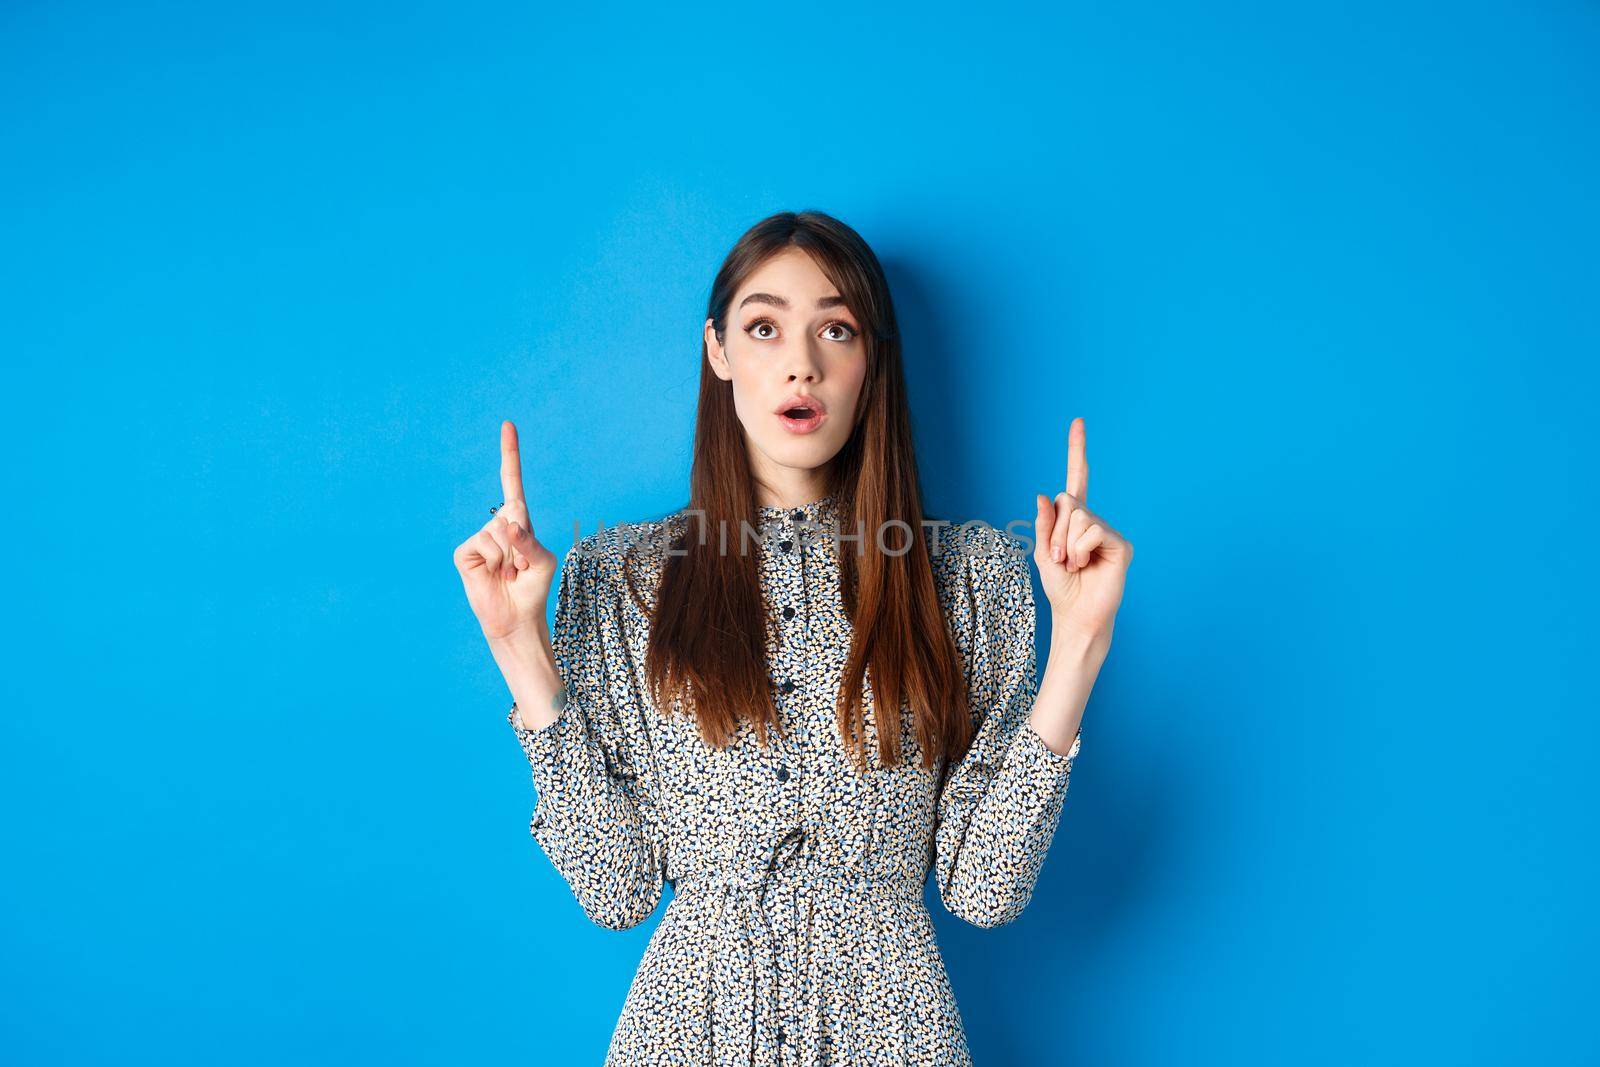 Surprised romantic girl in dress pointing, looking up with opened mouth and fascinated gaze, standing on blue background.